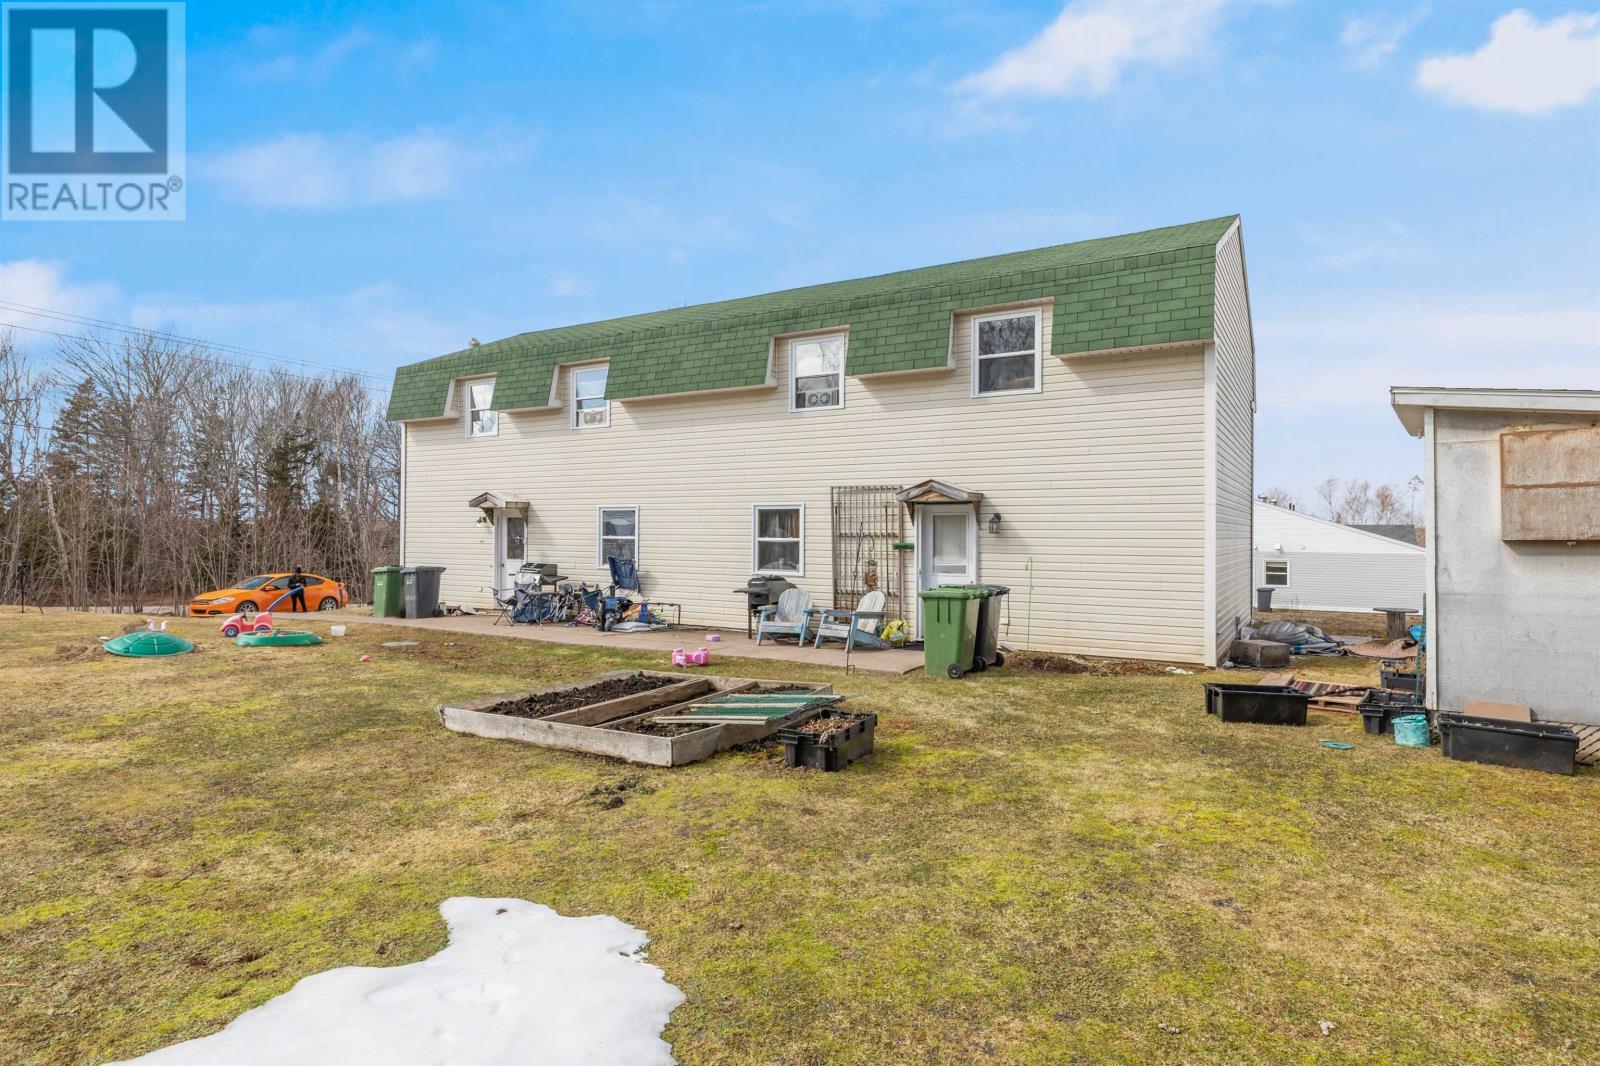 5841/5843 Campbell Road|Victoria Cross, montague, Prince Edward Island